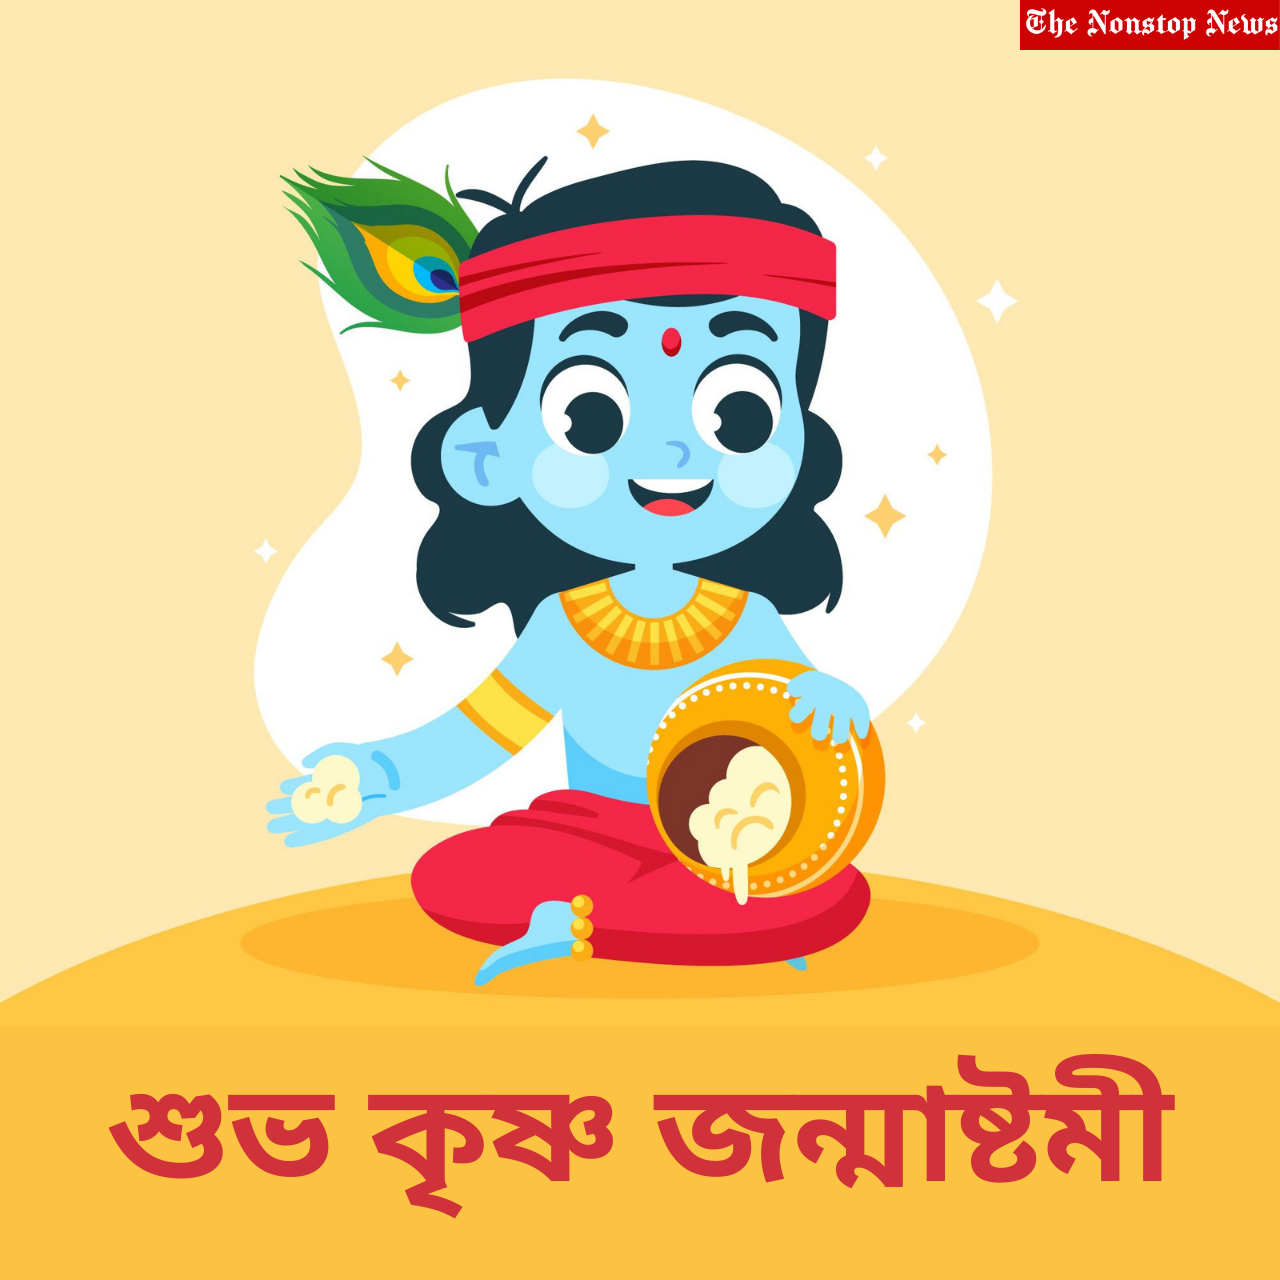 Happy Krishna Janmashtami 2021 Bengali Wishes, Messages, Quotes, HD Images, Messages, Greetings, Facebook, and WhatsApp Status to share